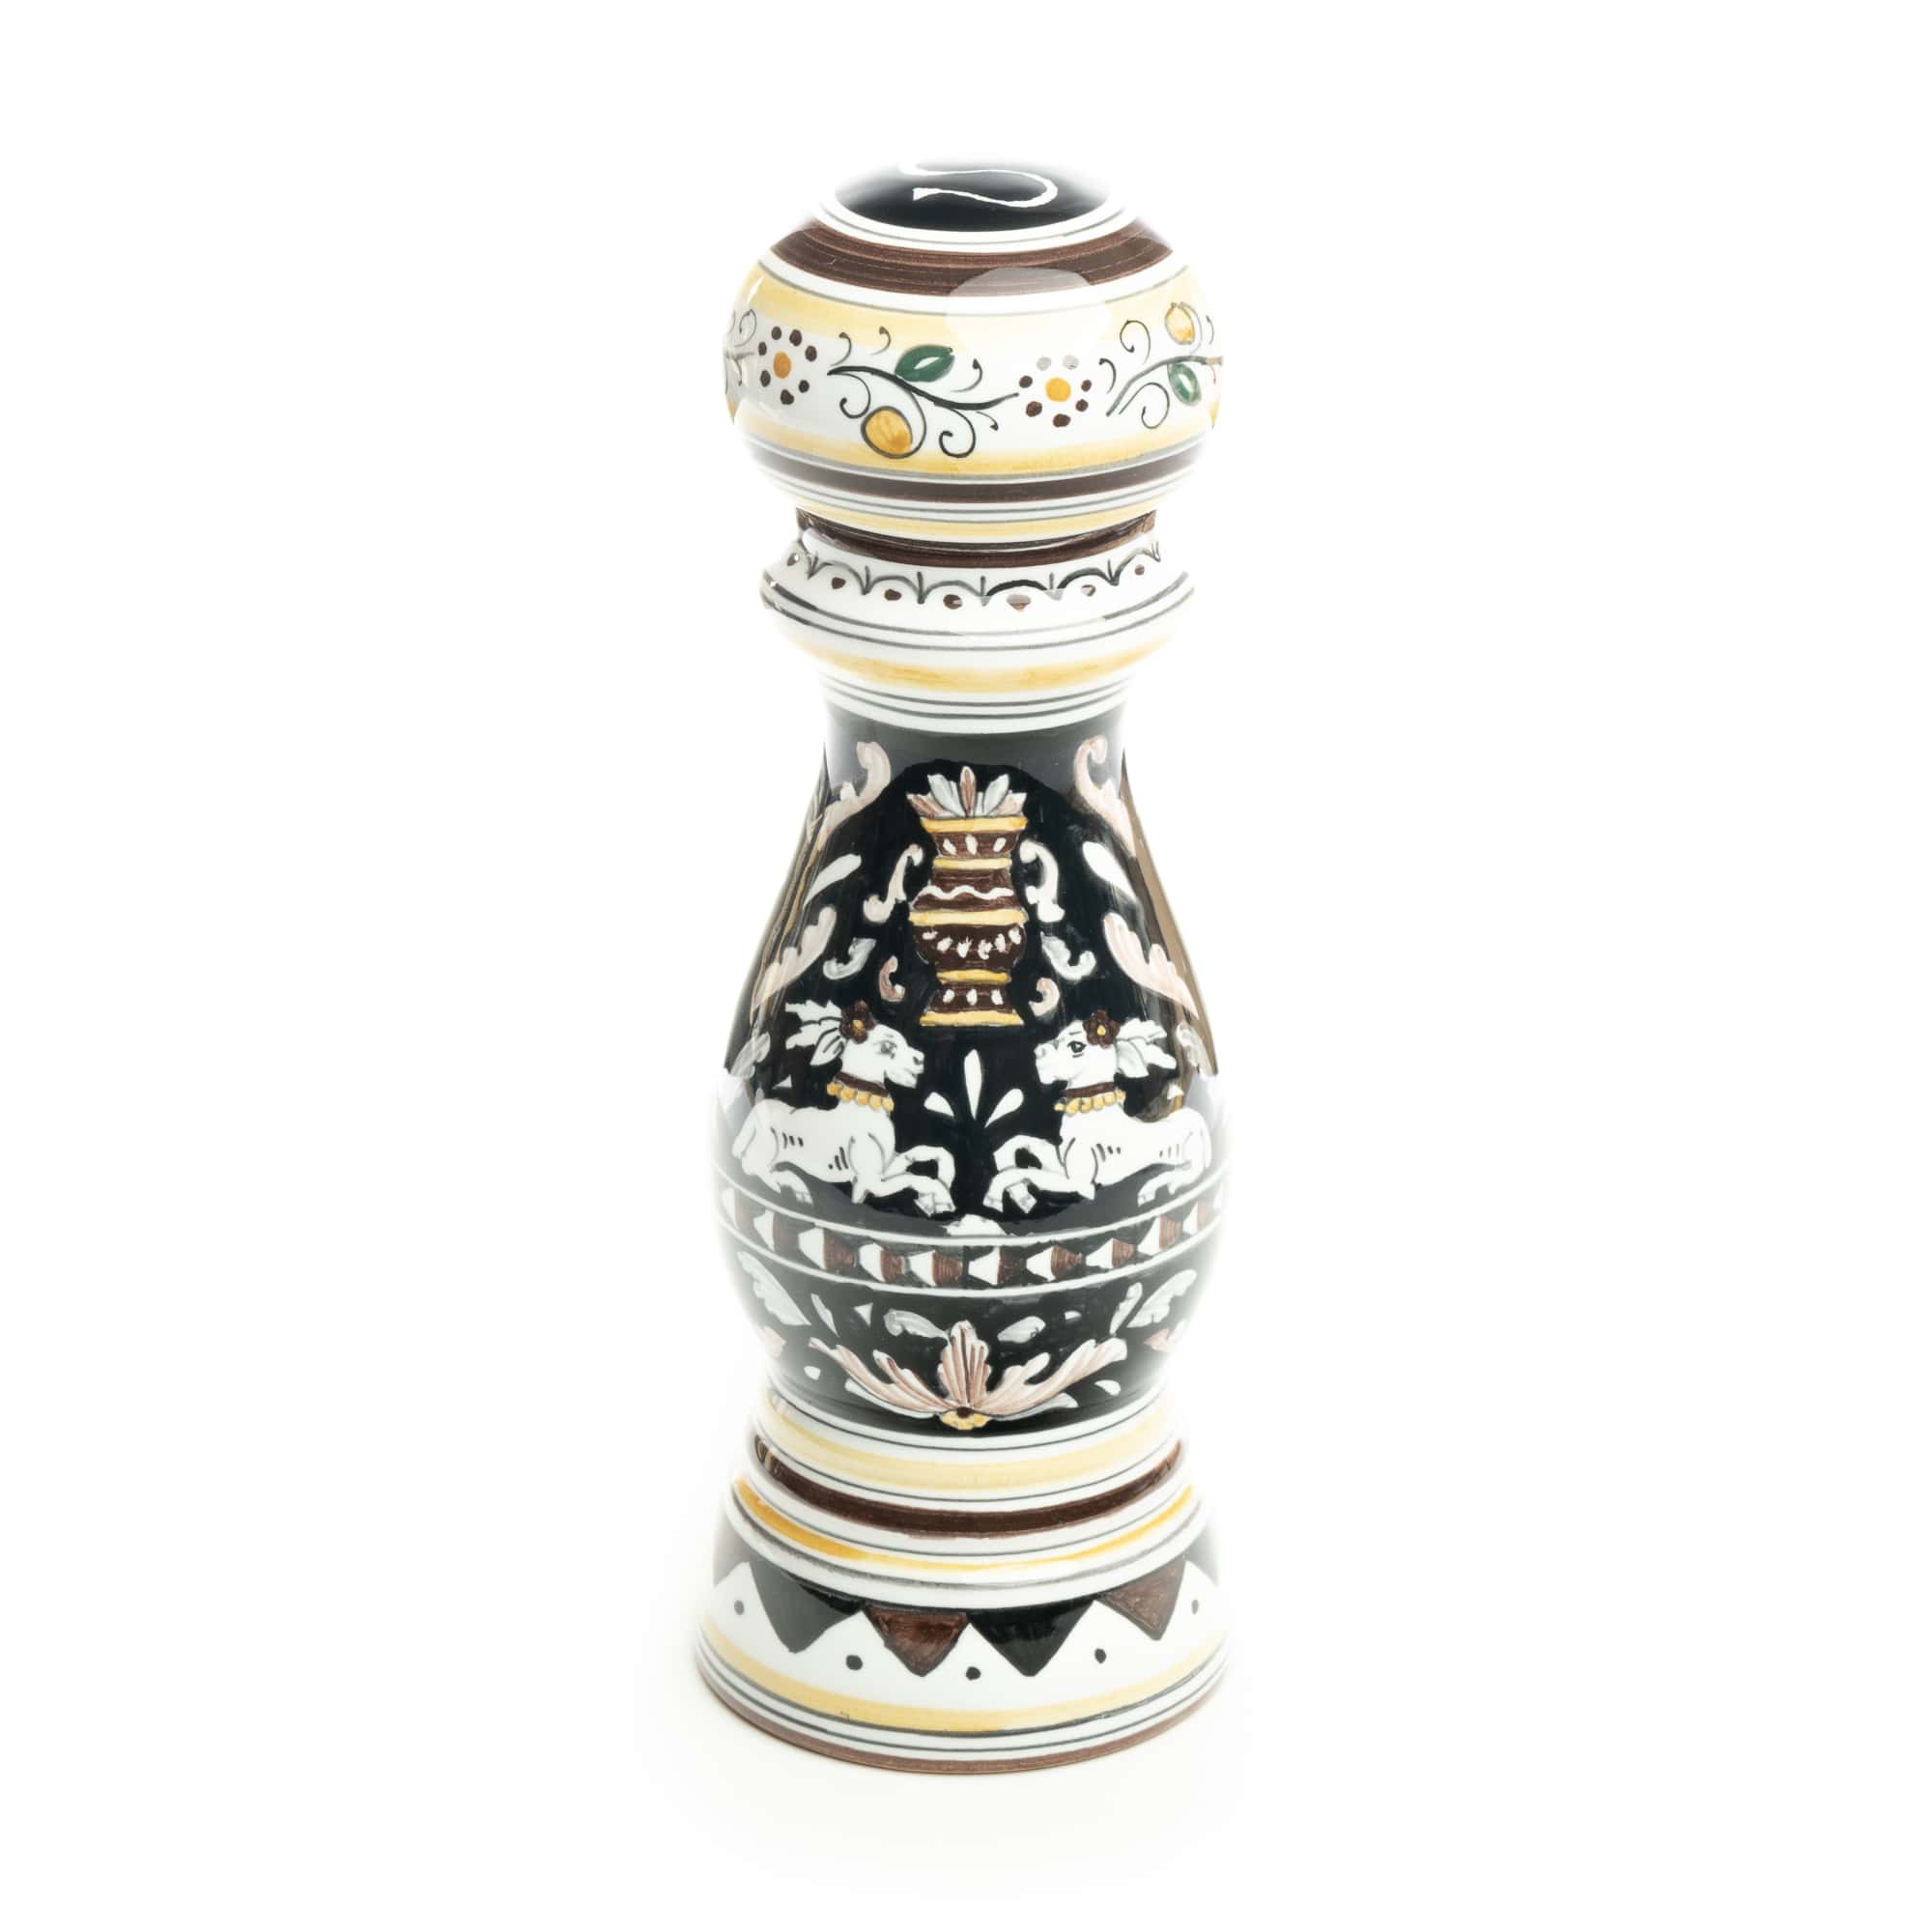 Siena - Salt Grinder, ceramics, pottery, italian design, majolica, handmade, handcrafted, handpainted, home decor, kitchen art, home goods, deruta, majolica, Artisan, treasures, traditional art, modern art, gift ideas, style, SF, shop small business, artists, shop online, landmark store, legacy, one of a kind, limited edition, gift guide, gift shop, retail shop, decorations, shopping, italy, home staging, home decorating, home interiors